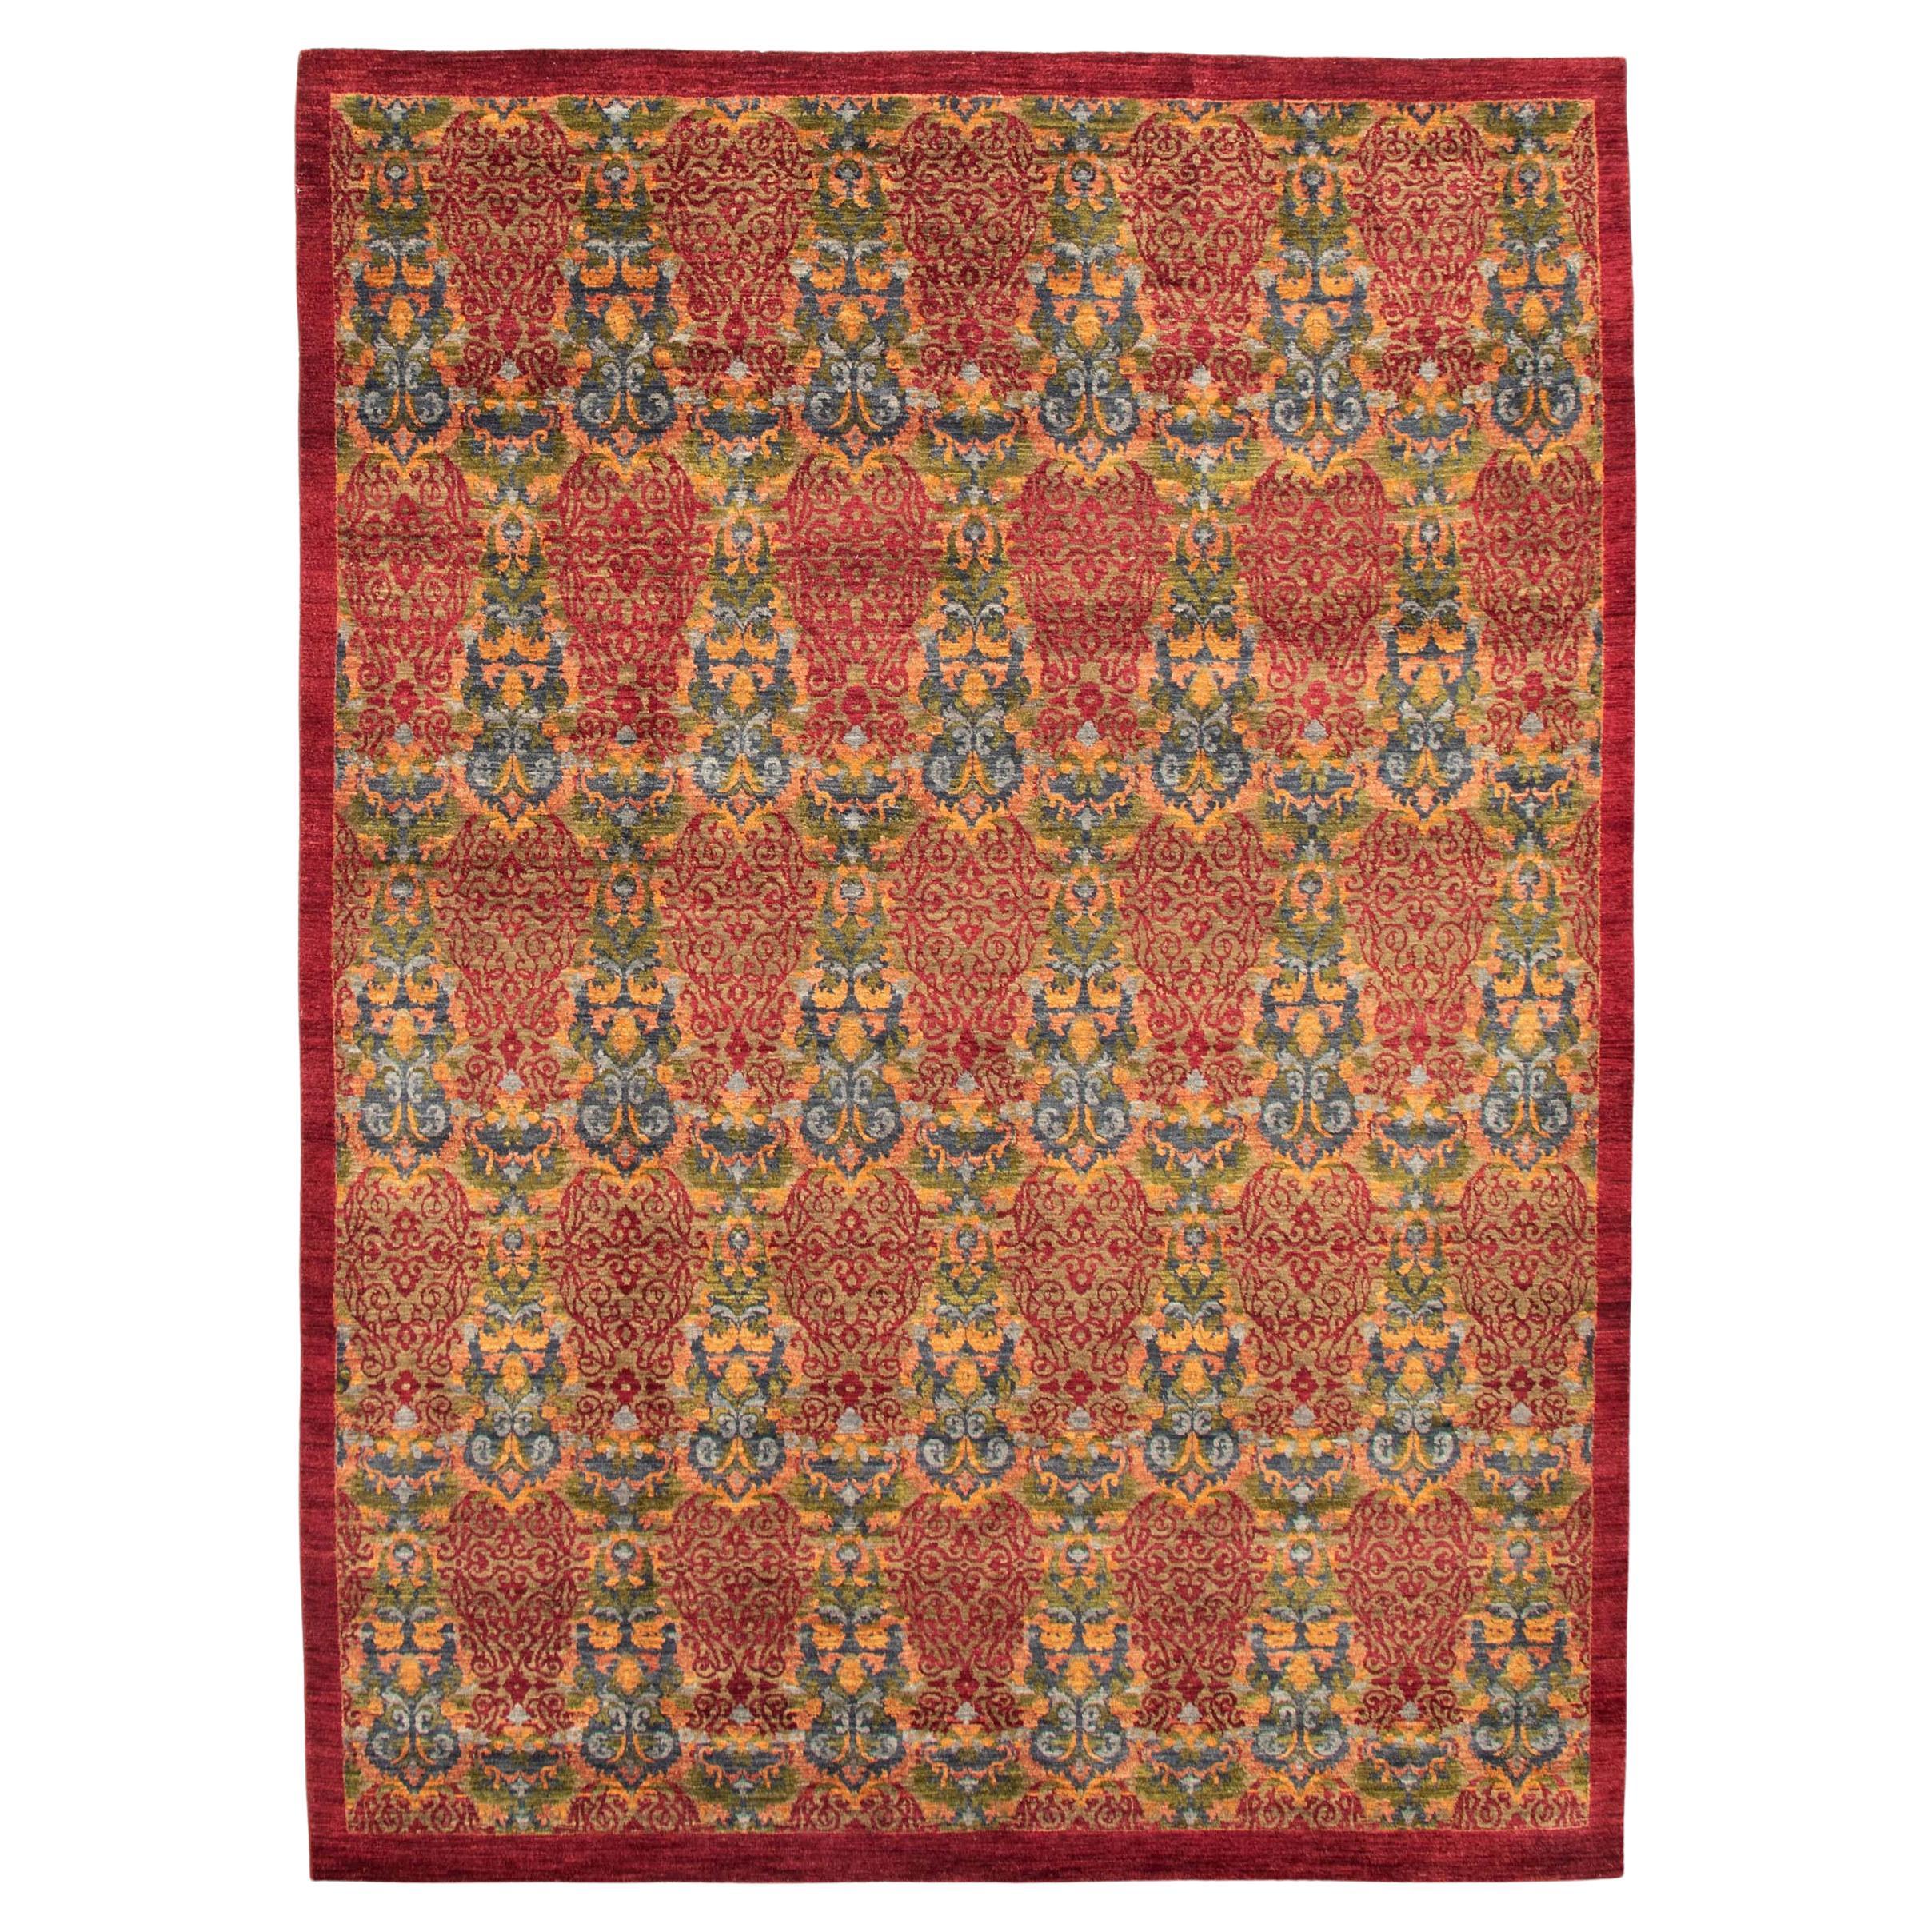 Lahore Carpet, Modern, Red, Taupe, Blue, and Green, Wool, 8’ x 10’